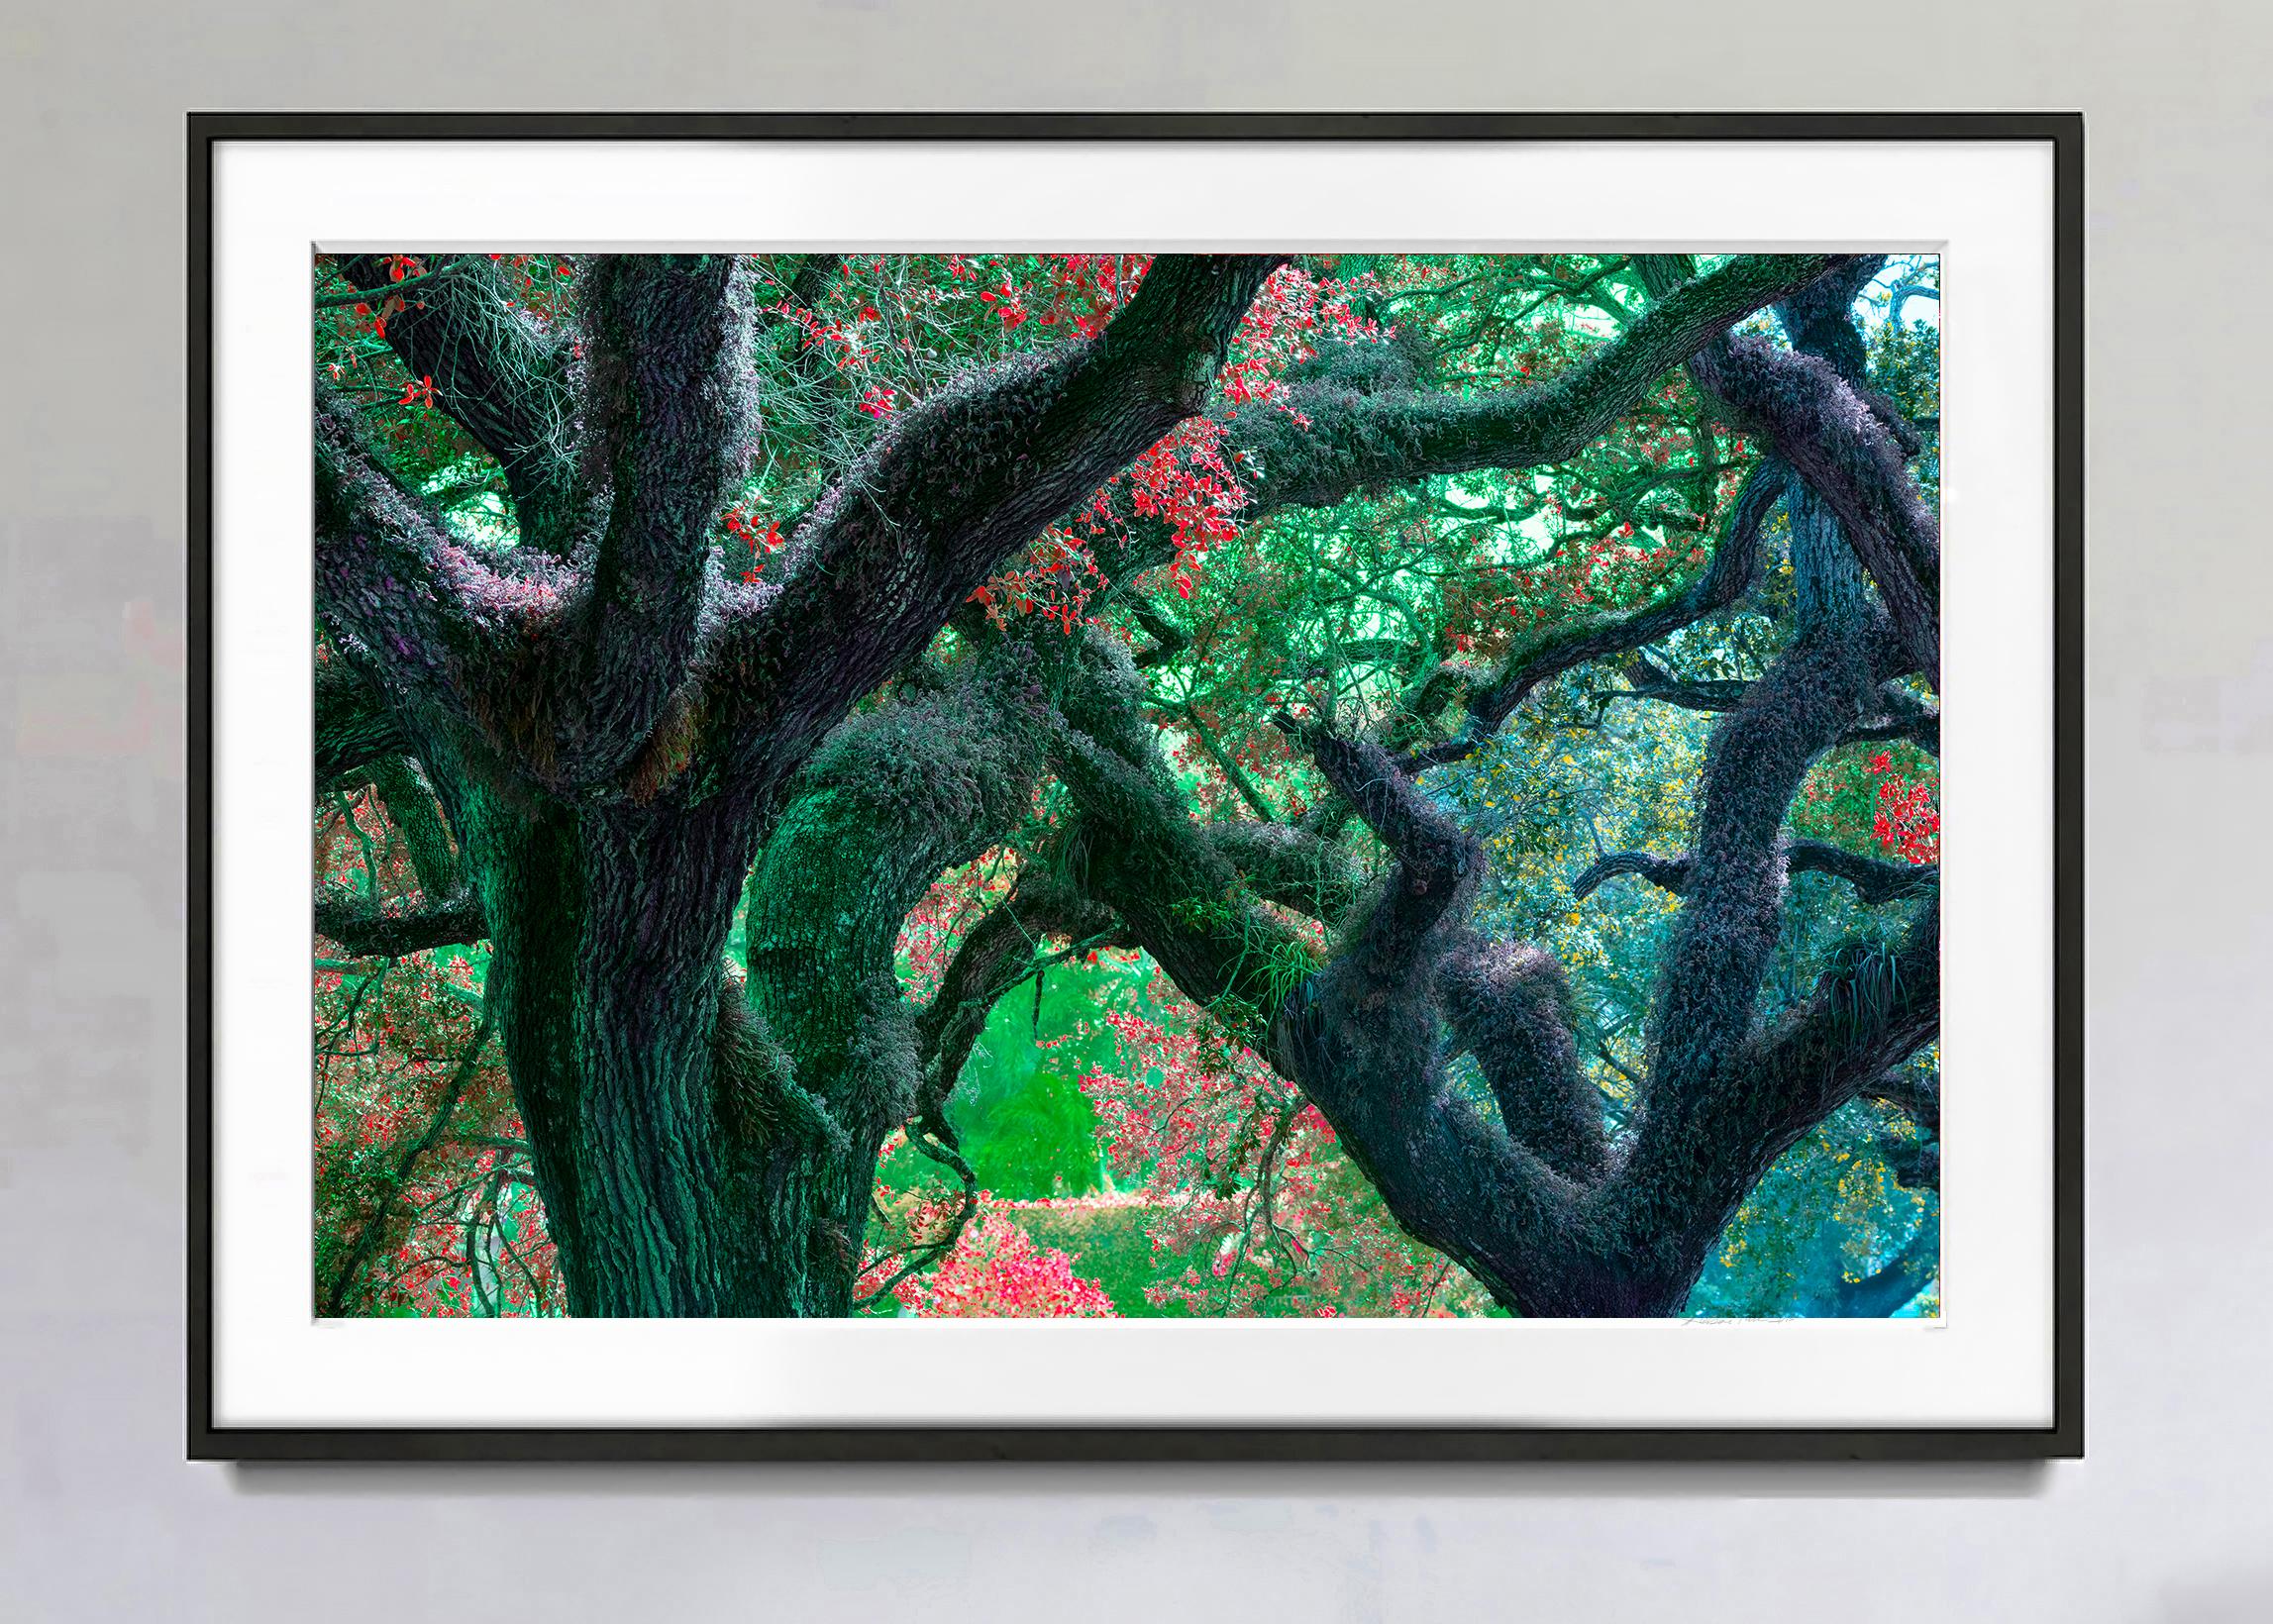 Dreamy Trees:  Labyrinth Continuum - Photograph by Robert Funk